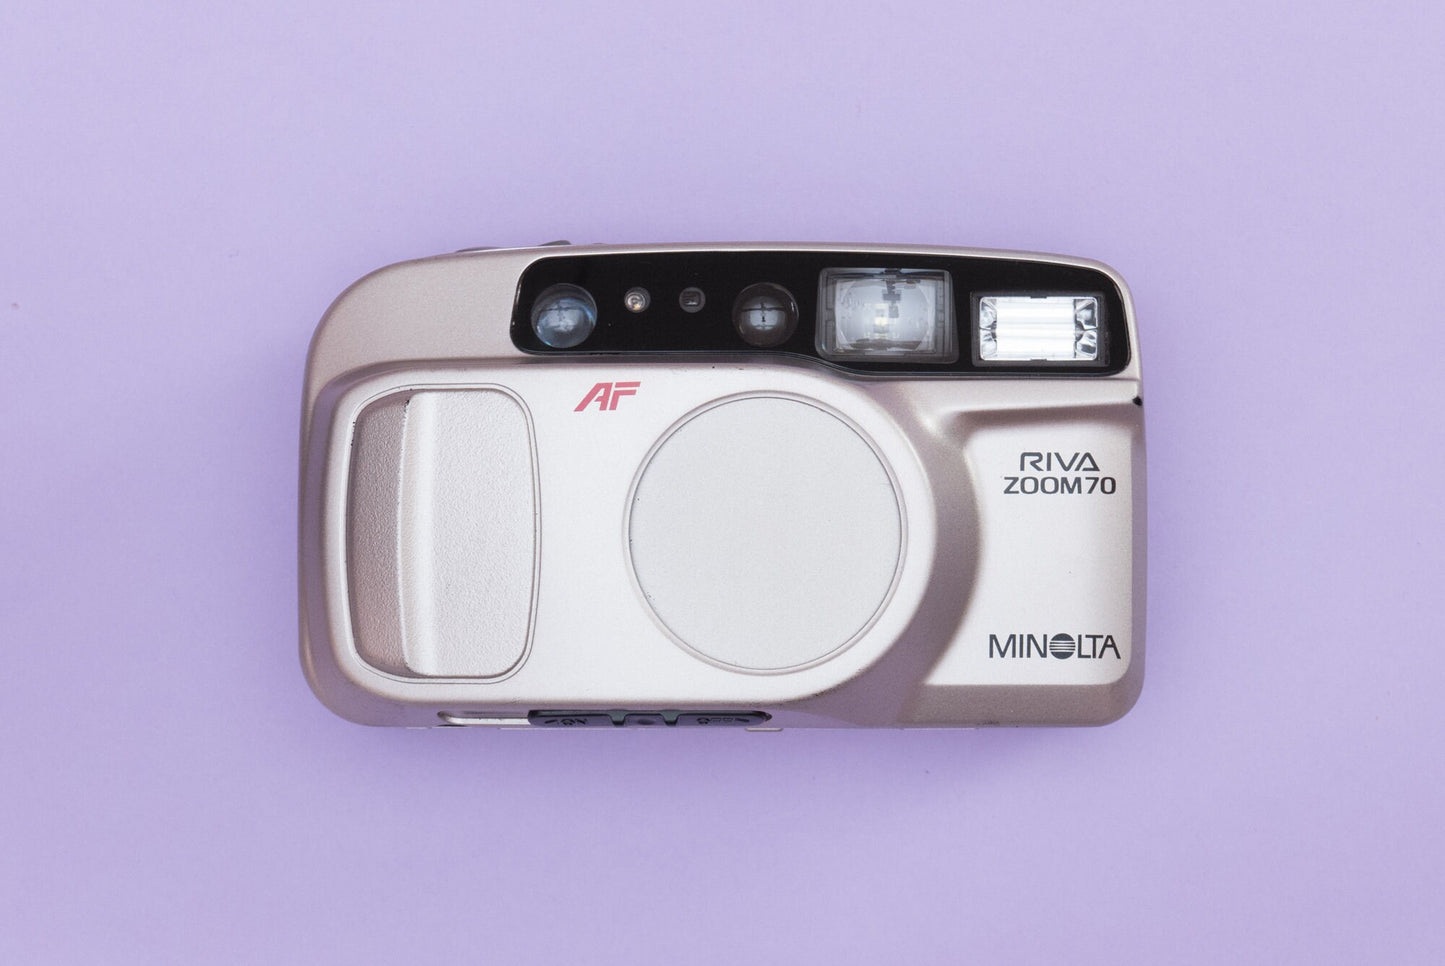 Minolta Riva Zoom 70 Compact 35mm Point and Shoot Film Camera